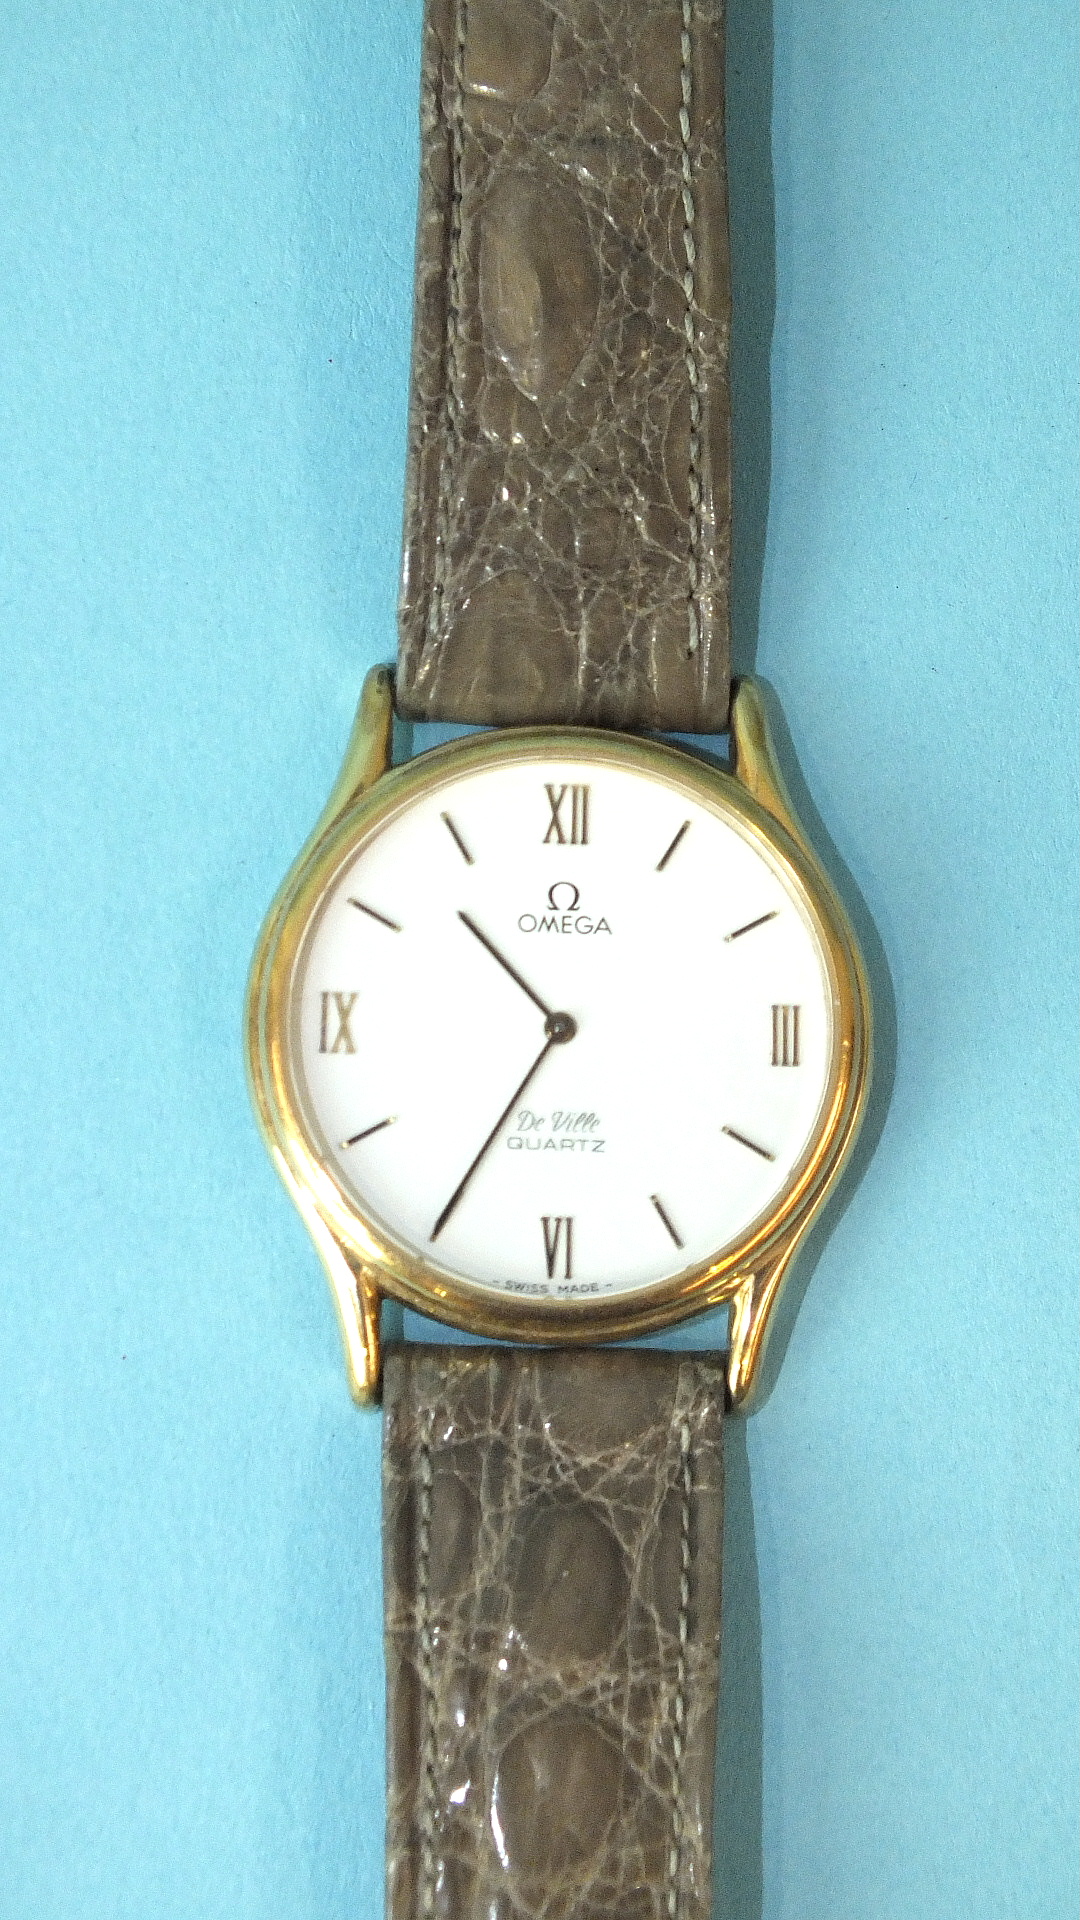 Omega, a gent's Omega De Ville Quartz wrist watch, the white dial, 33mm diameter, with Roman and